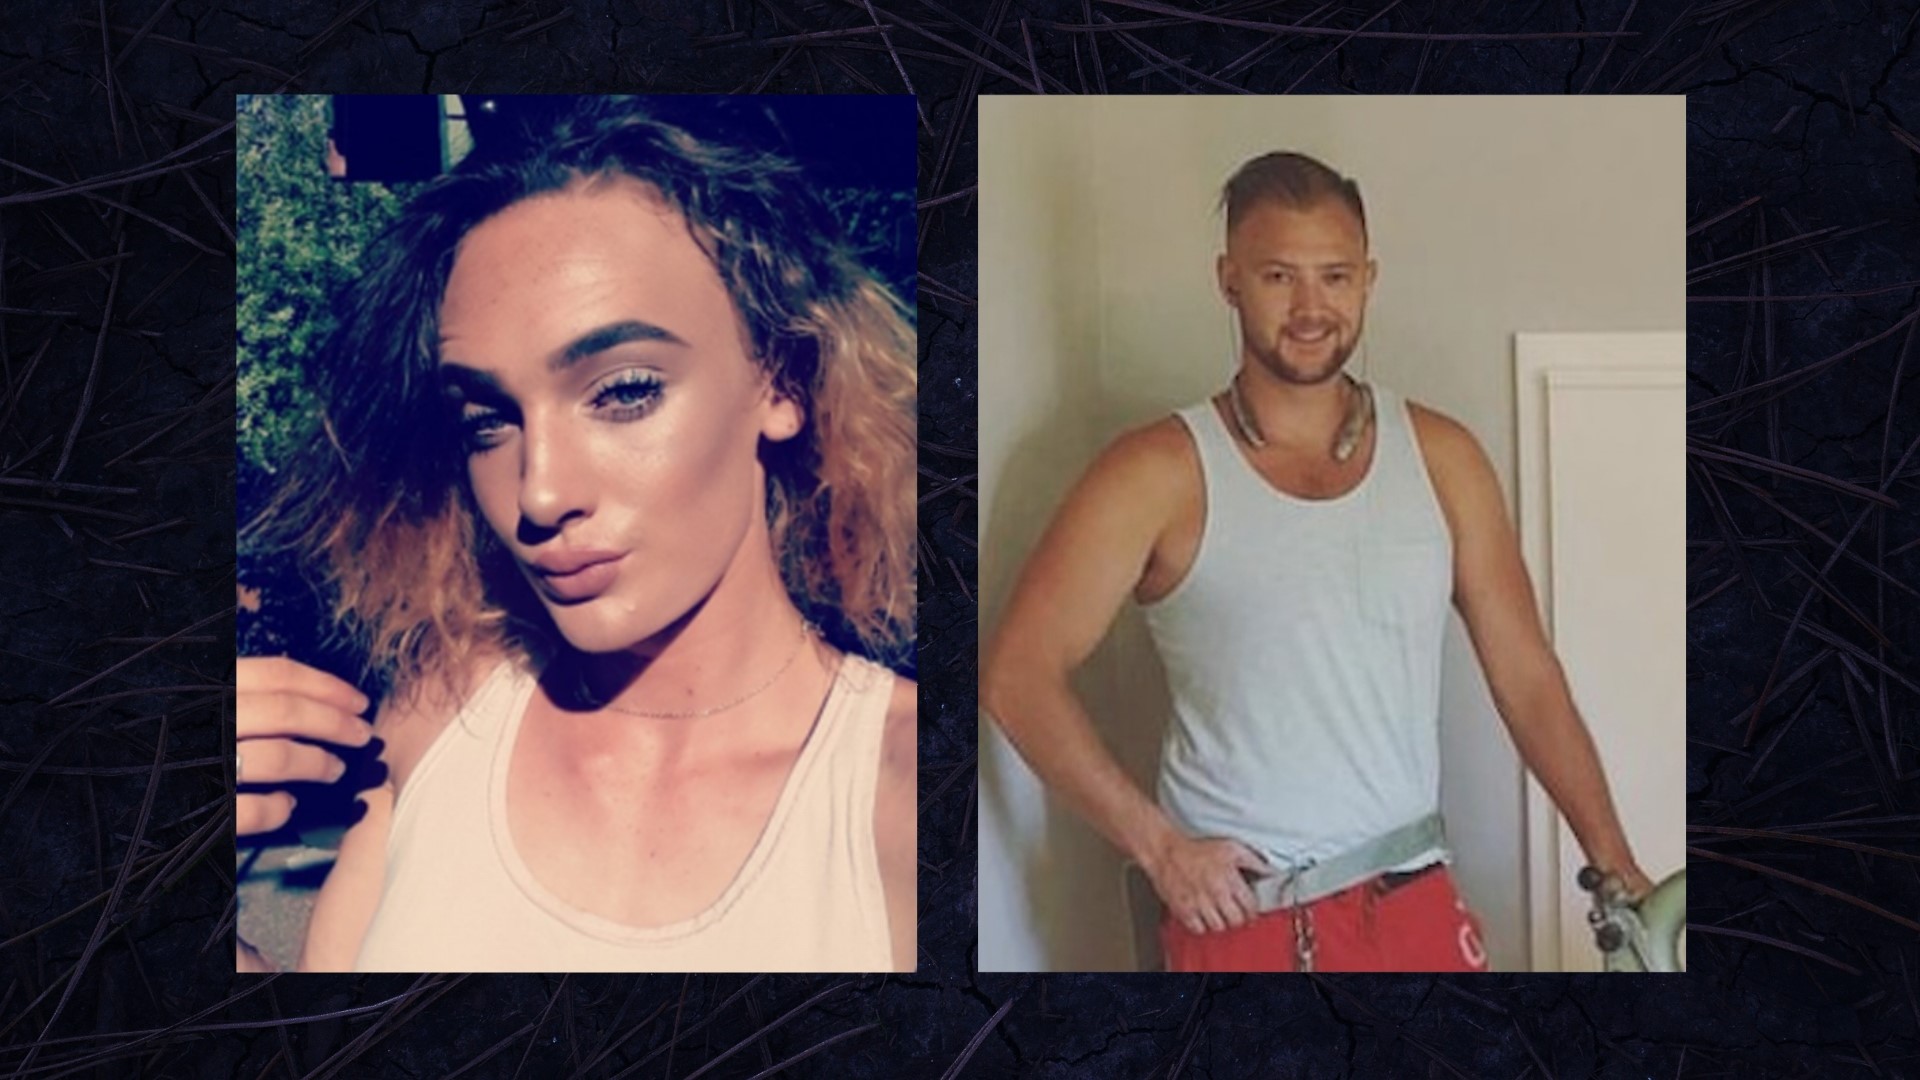 KGW's new true crime podcast, "Should Be Alive," examines the murder investigation of transgender Vancouver teen Nikki Kuhnhausen. Listen and follow starting May 25.